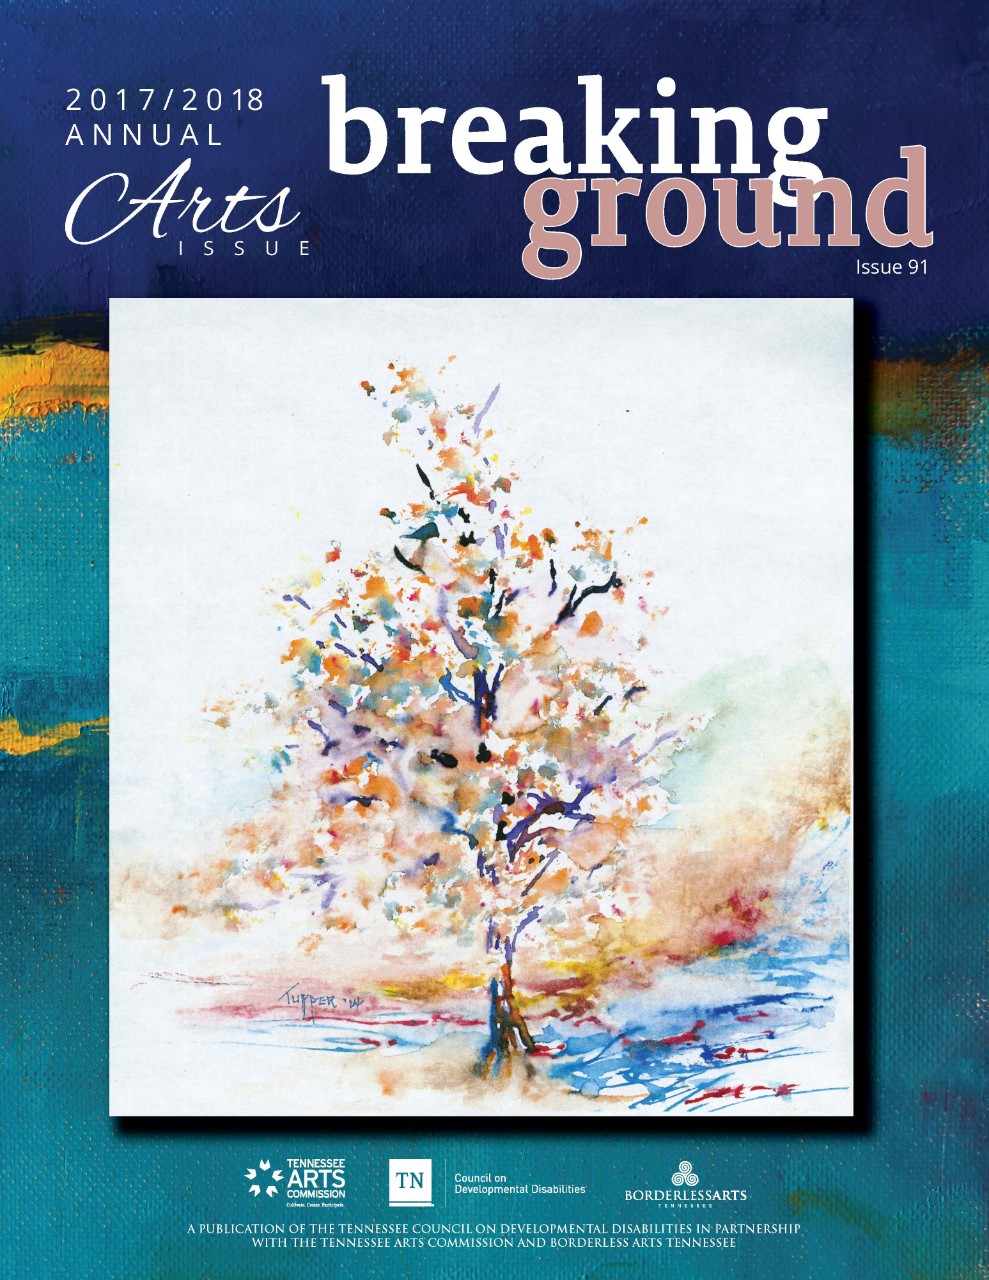 cover of breaking ground 2018 arts issue - shows a lovely watercolor of a tree with its leaves blowing in the wind, surrounded  by lots of blues and greens